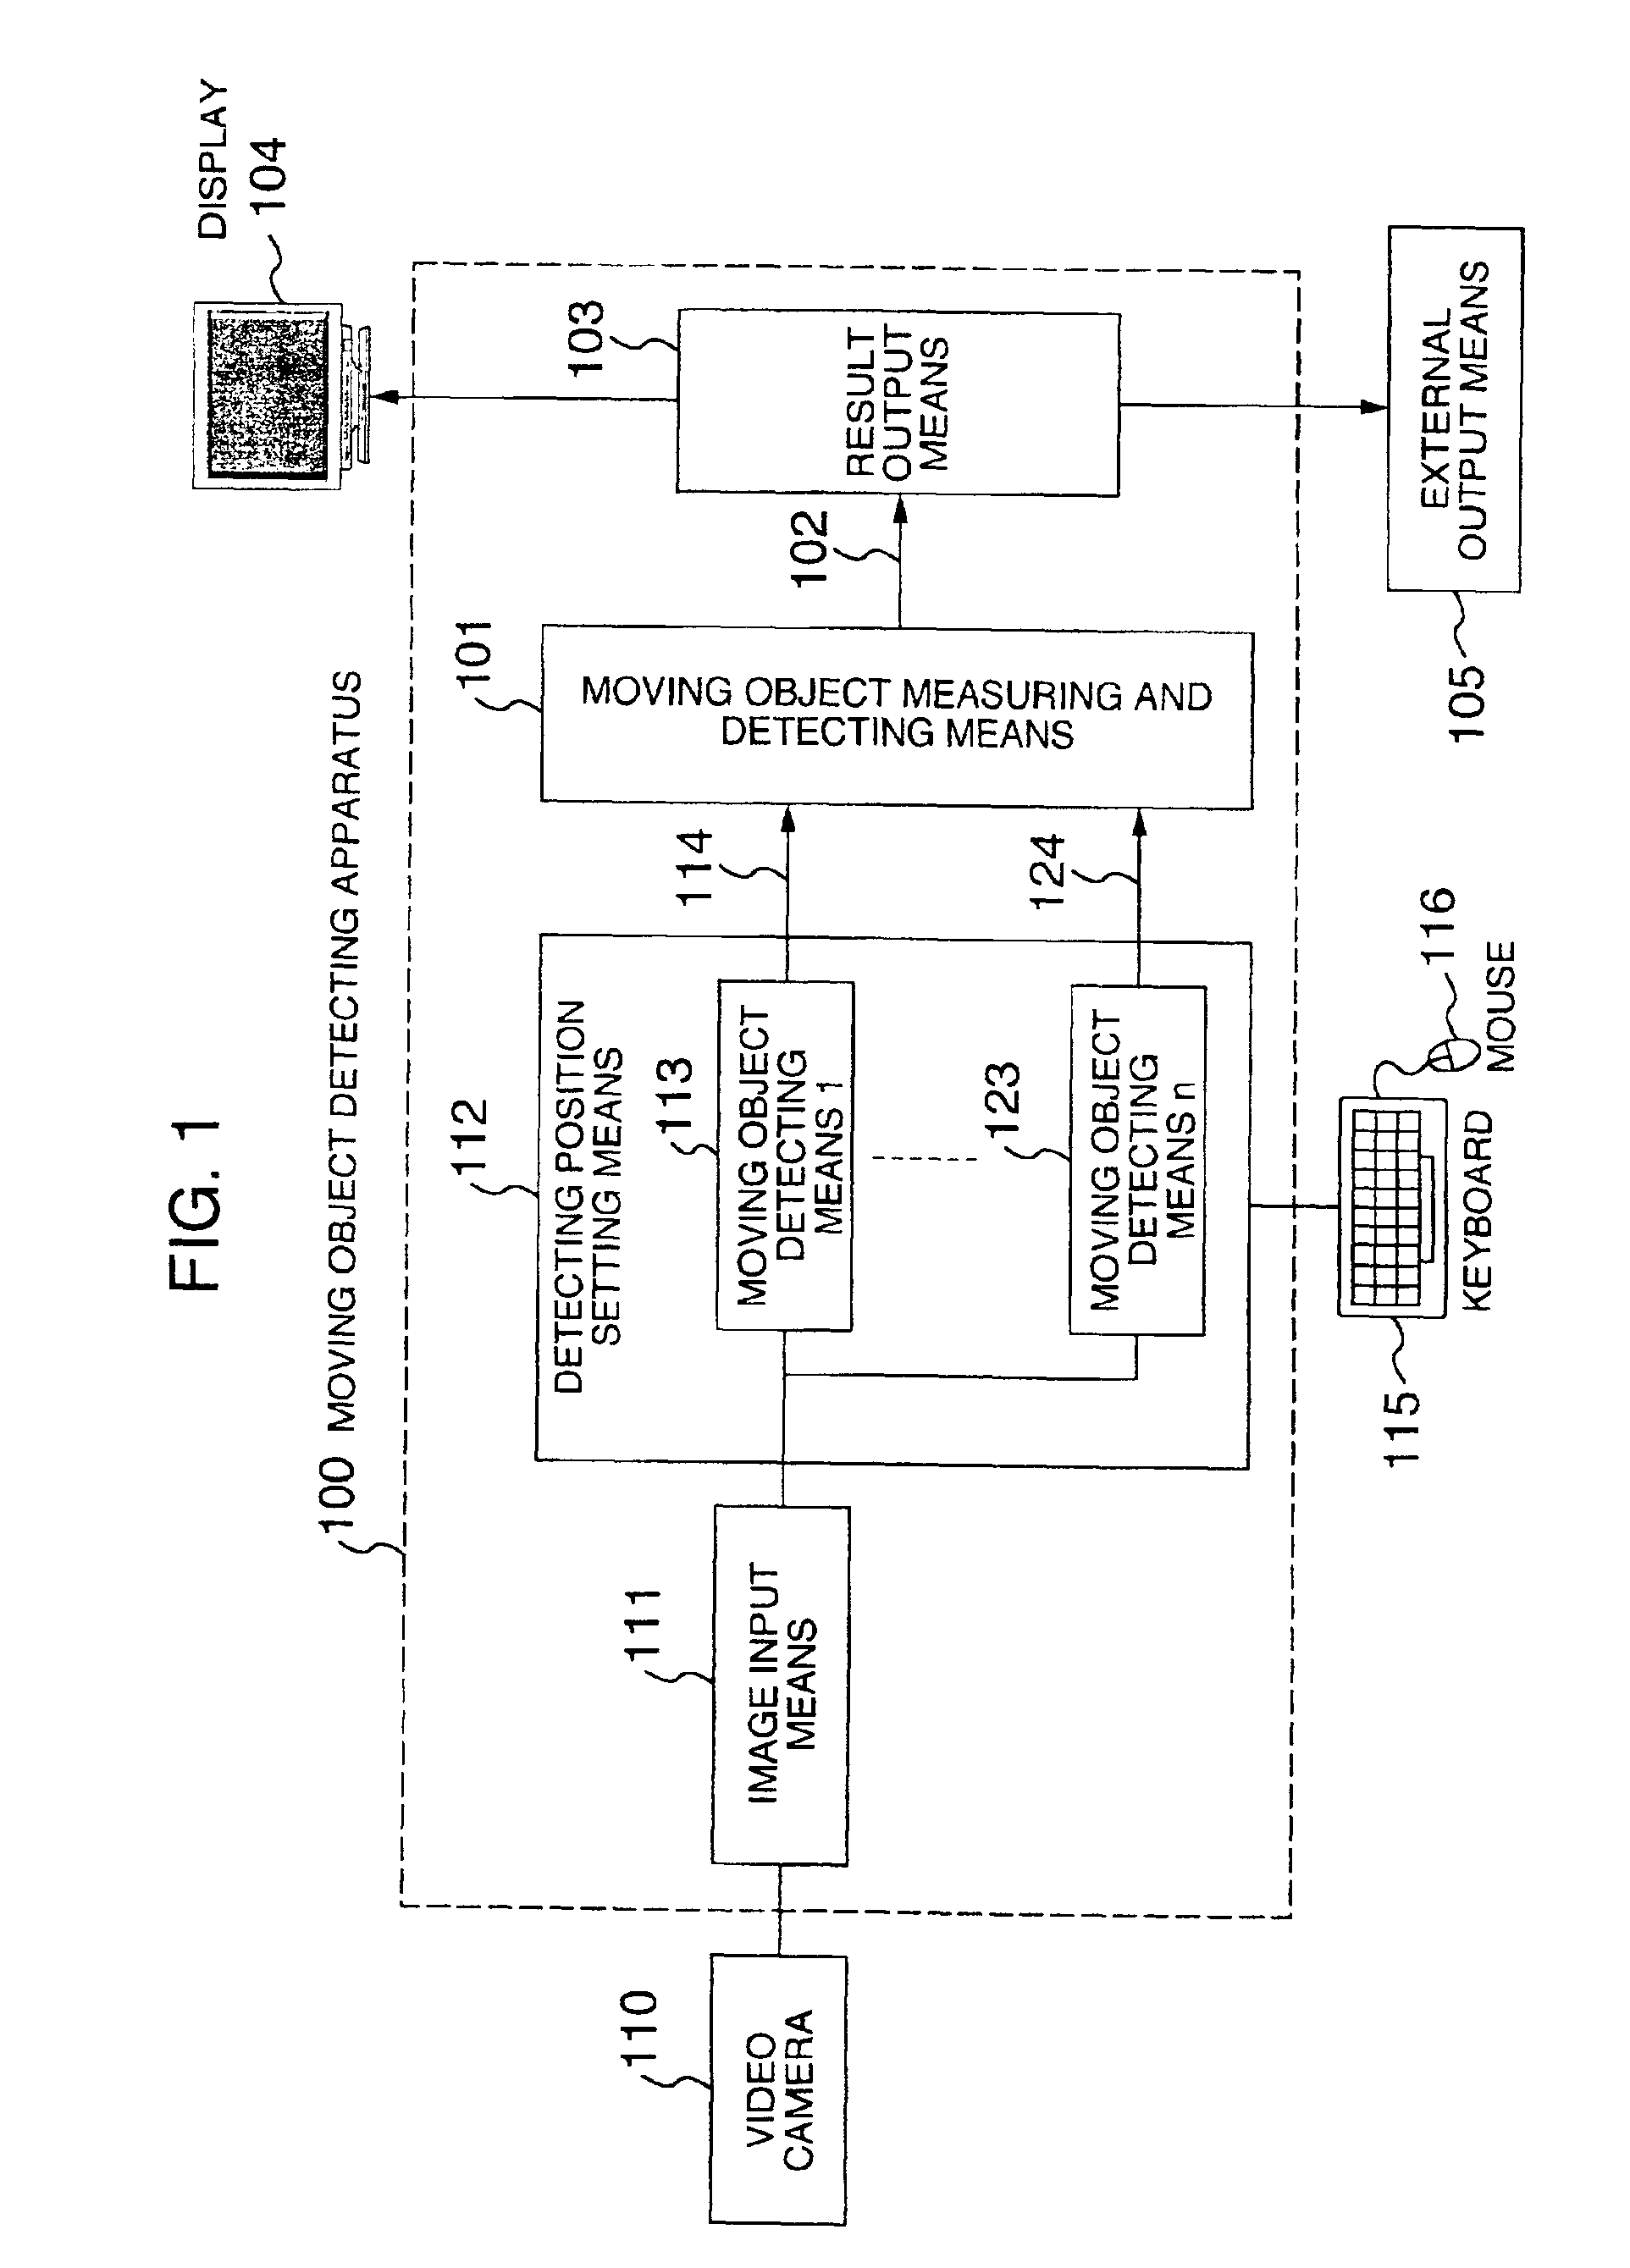 Method of detecting and measuring a moving object and apparatus therefor, and a recording medium for recording a program for detecting and measuring a moving object